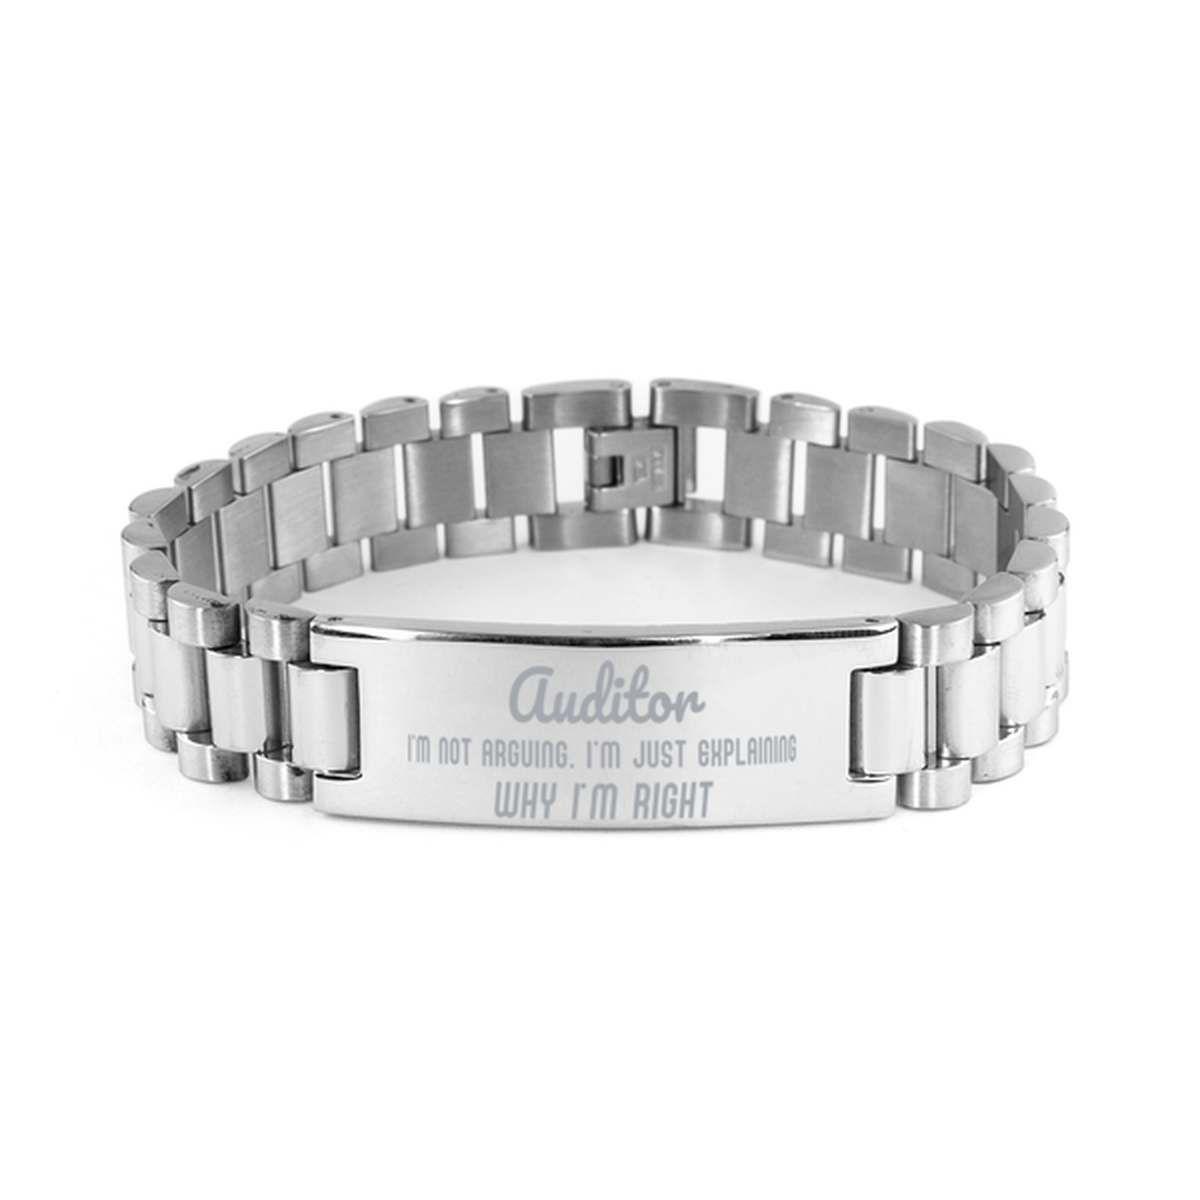 Auditor I'm not Arguing. I'm Just Explaining Why I'm RIGHT Ladder Stainless Steel Bracelet, Graduation Birthday Christmas Auditor Gifts For Auditor Funny Saying Quote Present for Men Women Coworker